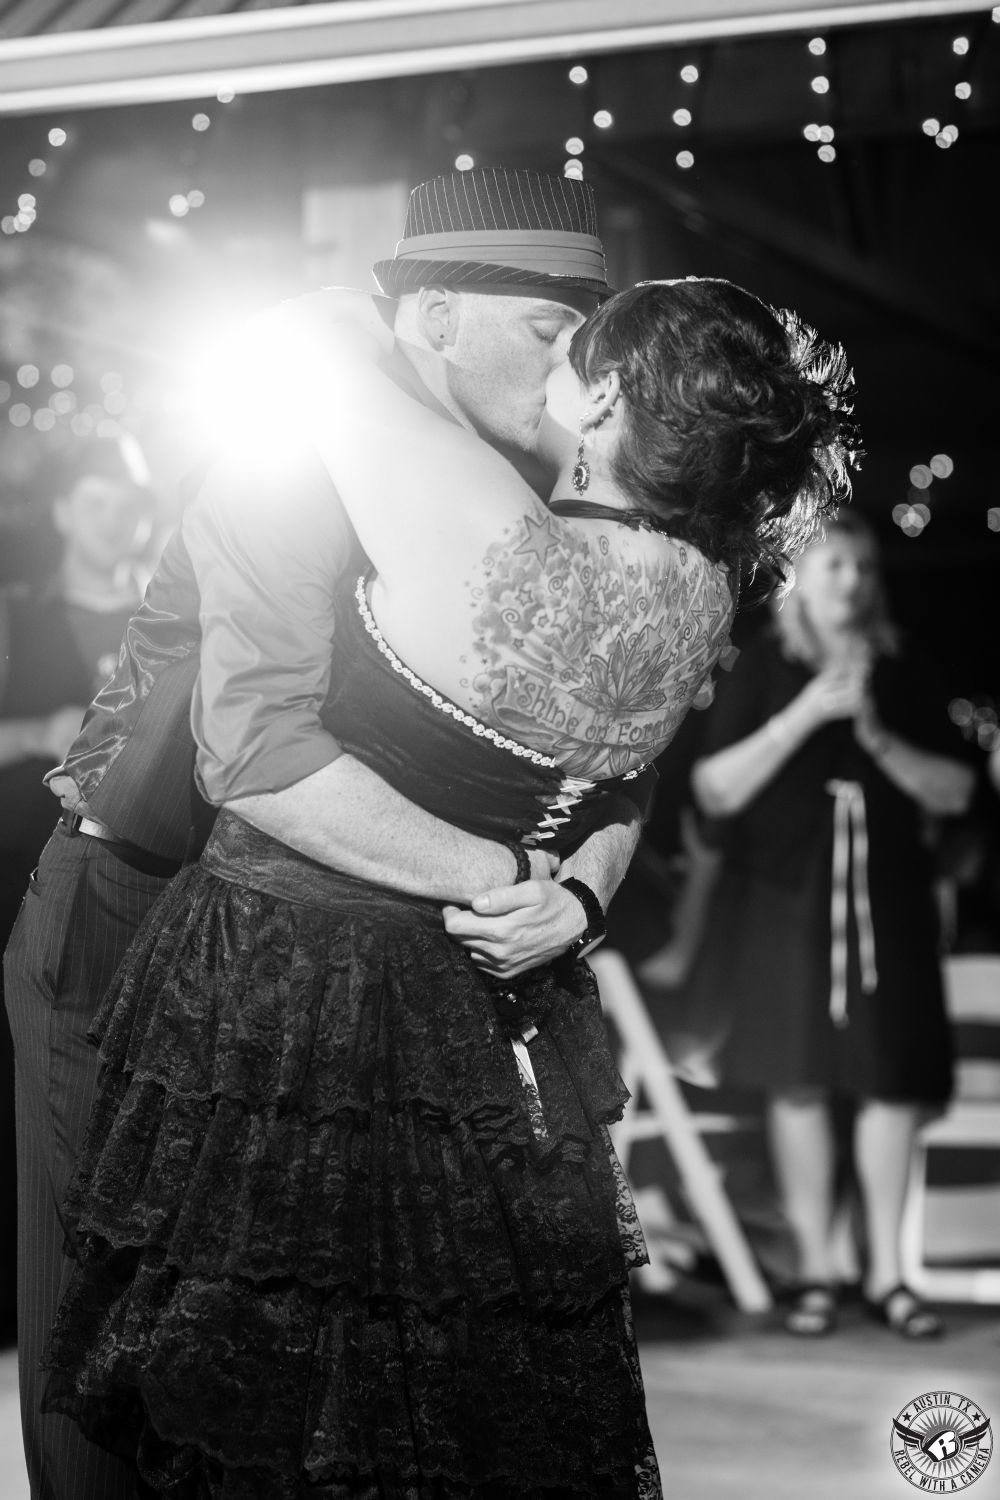 Dramatic black and white wedding picture of off beat bride in black lace dress and tattoos kisses groom in black suit and hat during their first dance at their wedding reception at Cedar Bend Events in the Austin, Texas, area taken by Austin wedding photographer.